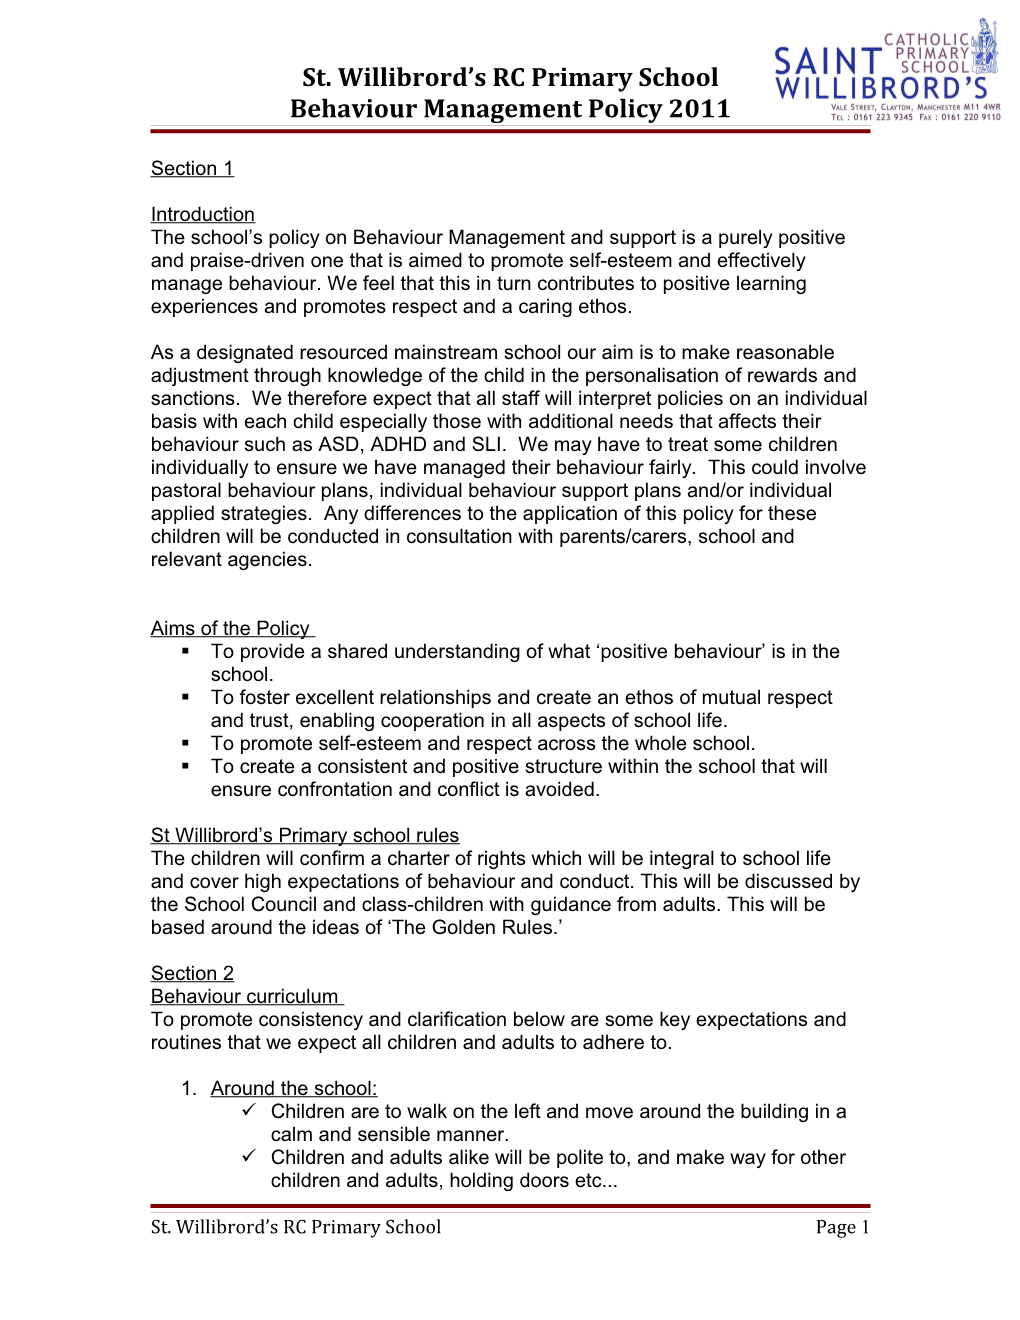 St. Willibrord S RC Primary School Behaviour Management Policy 2011